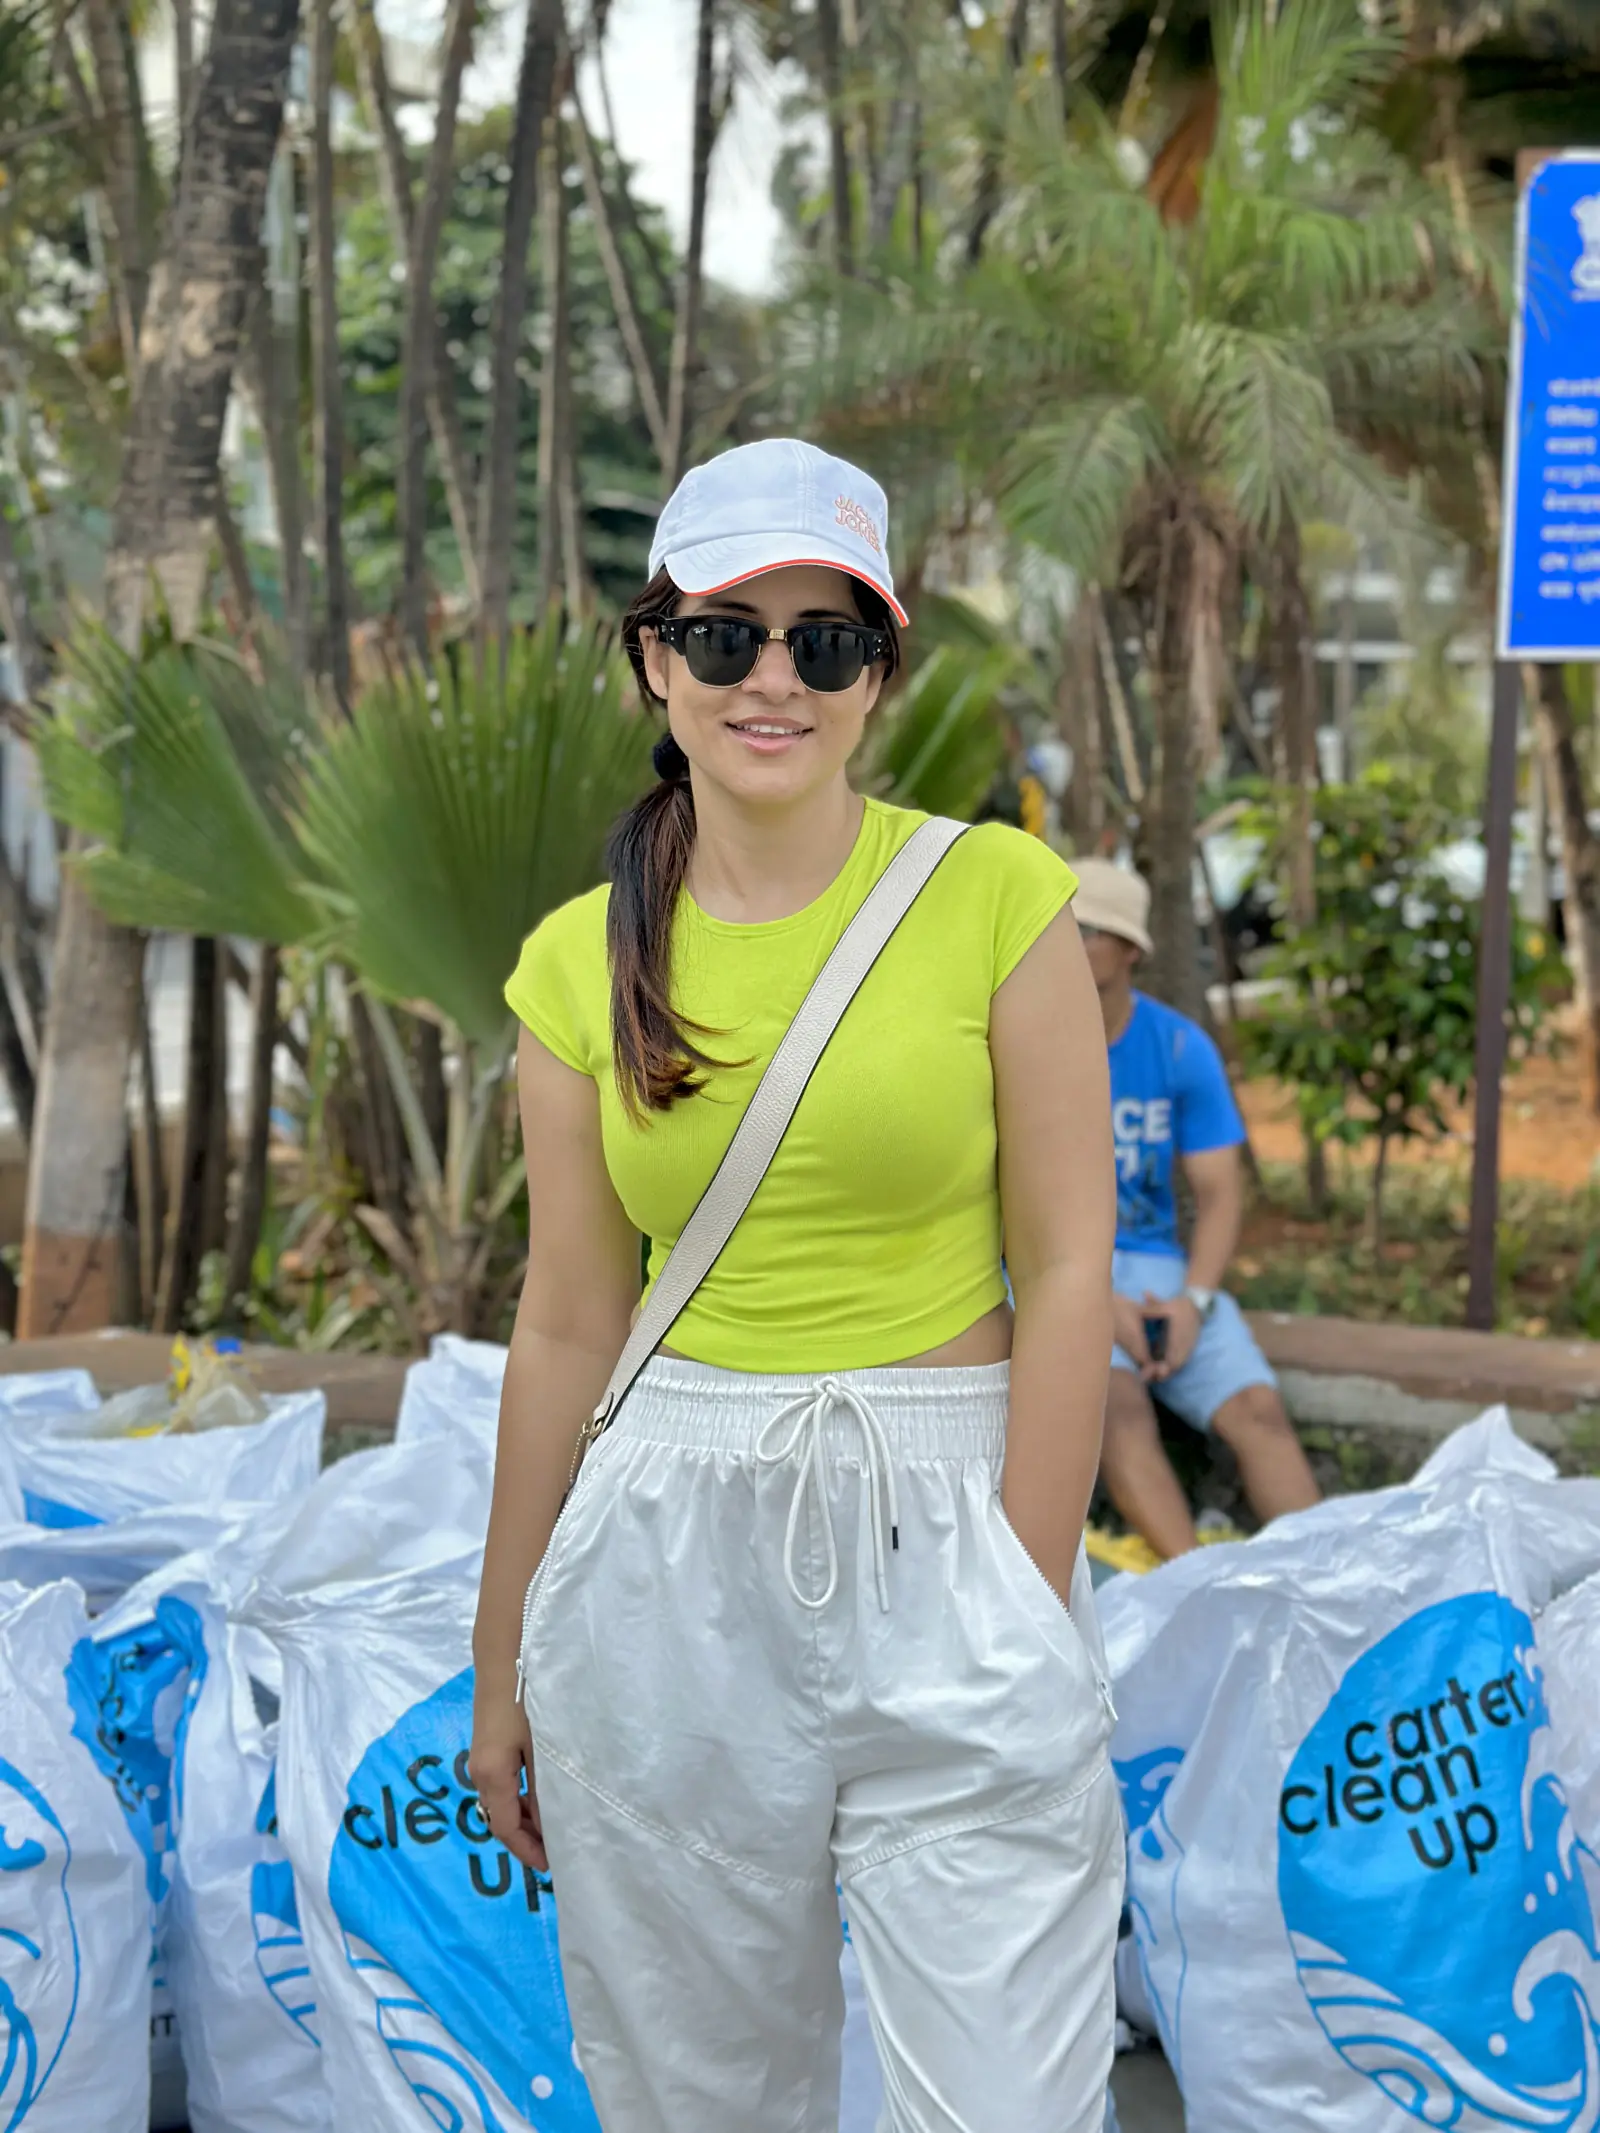 Actress Simple Kaul took part in a beach cleaning campaign in Bandra